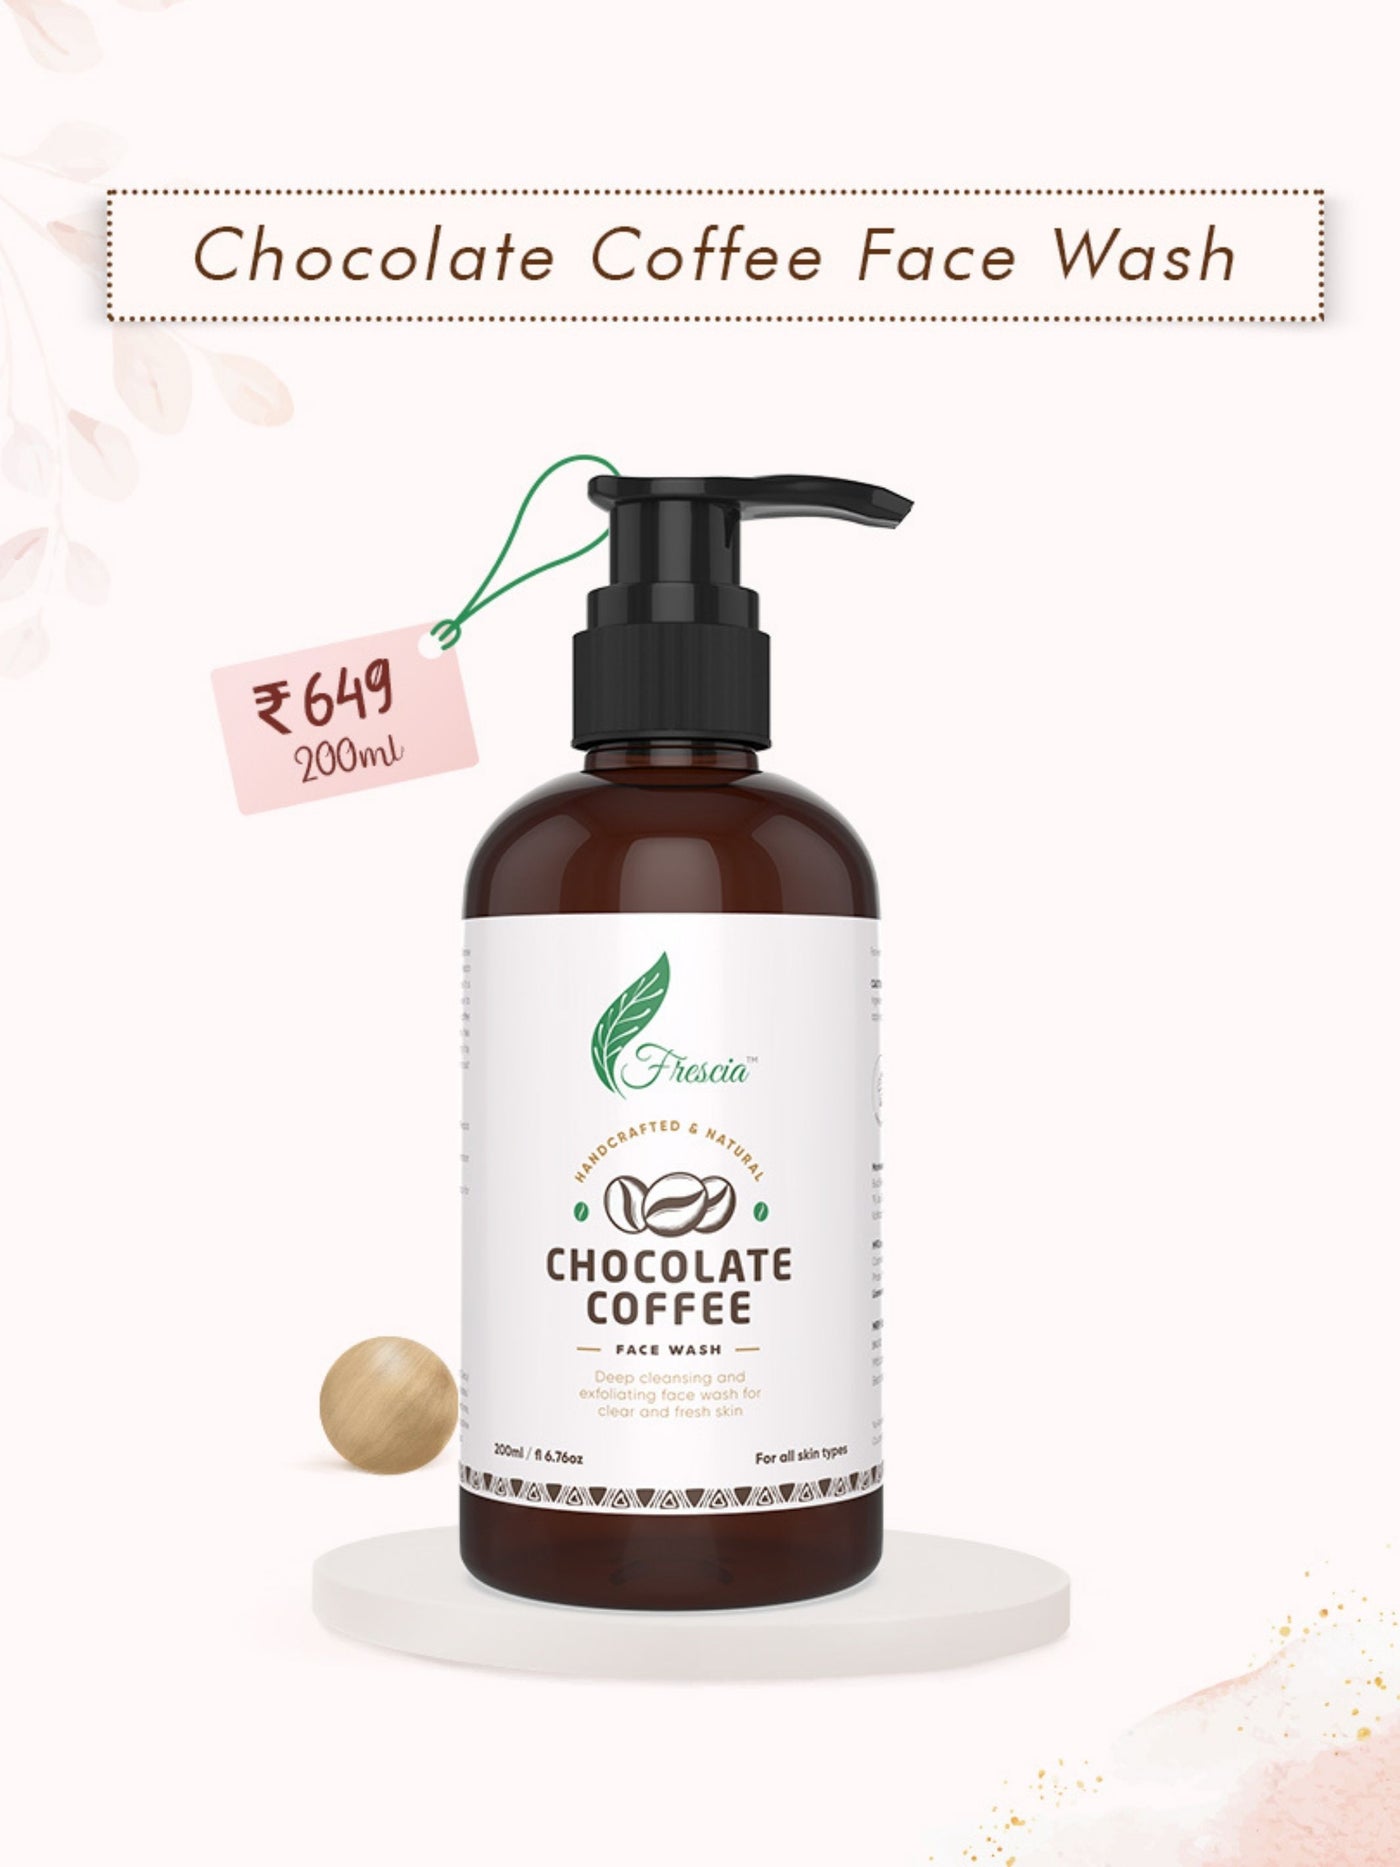 Chocolate Coffee Cleansers - Combo - View 7